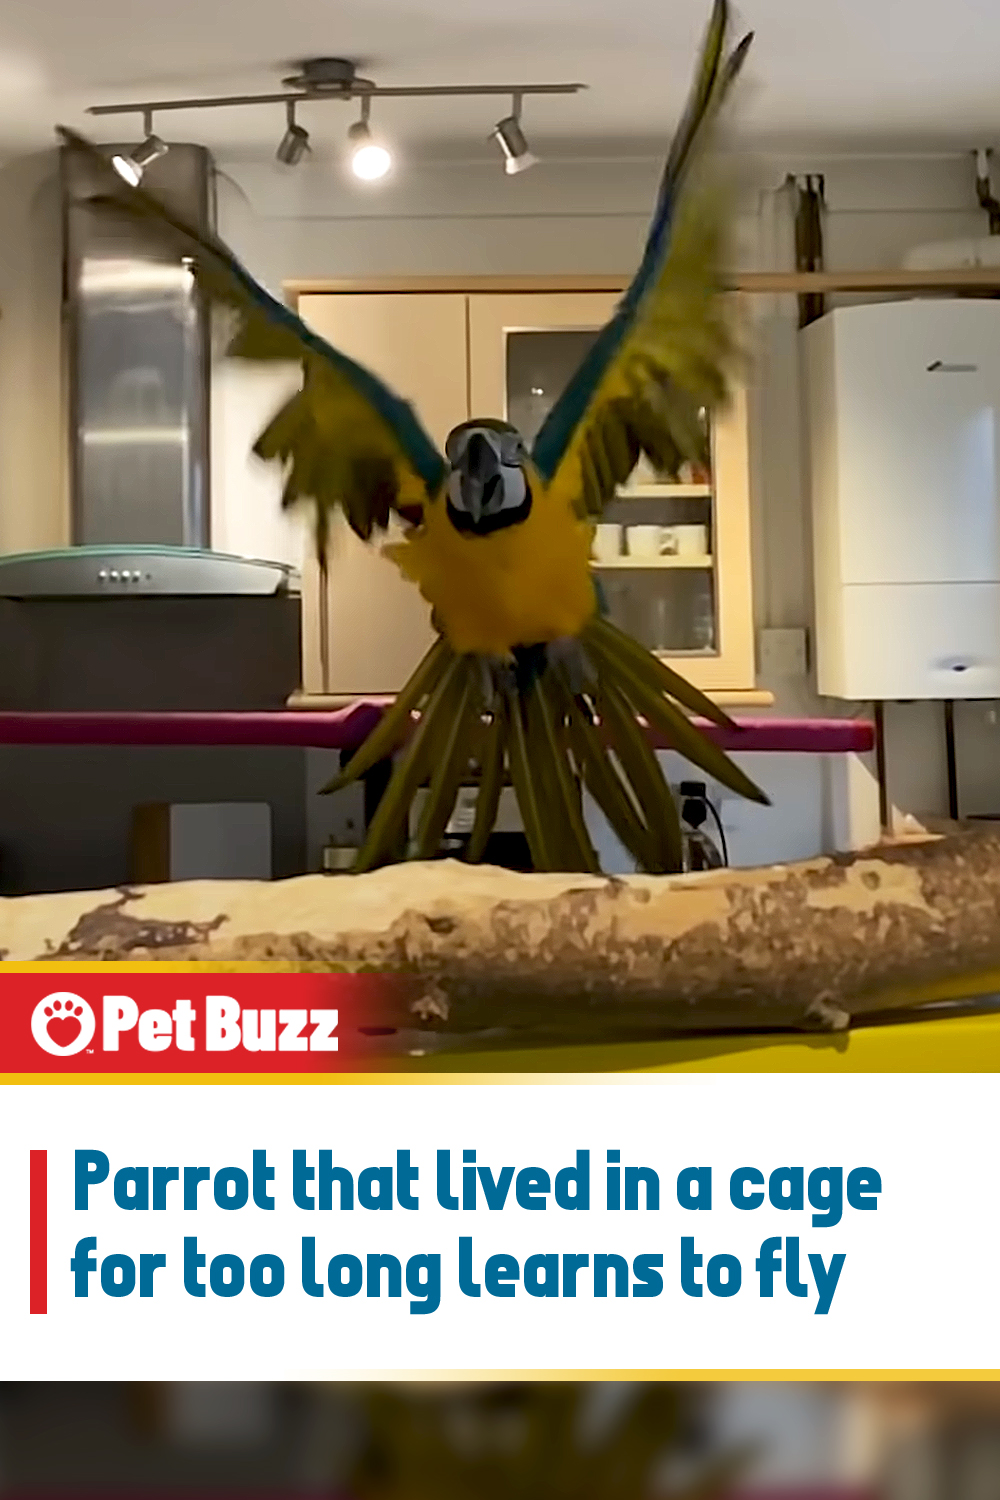 Parrot that lived in a cage for too long learns to fly